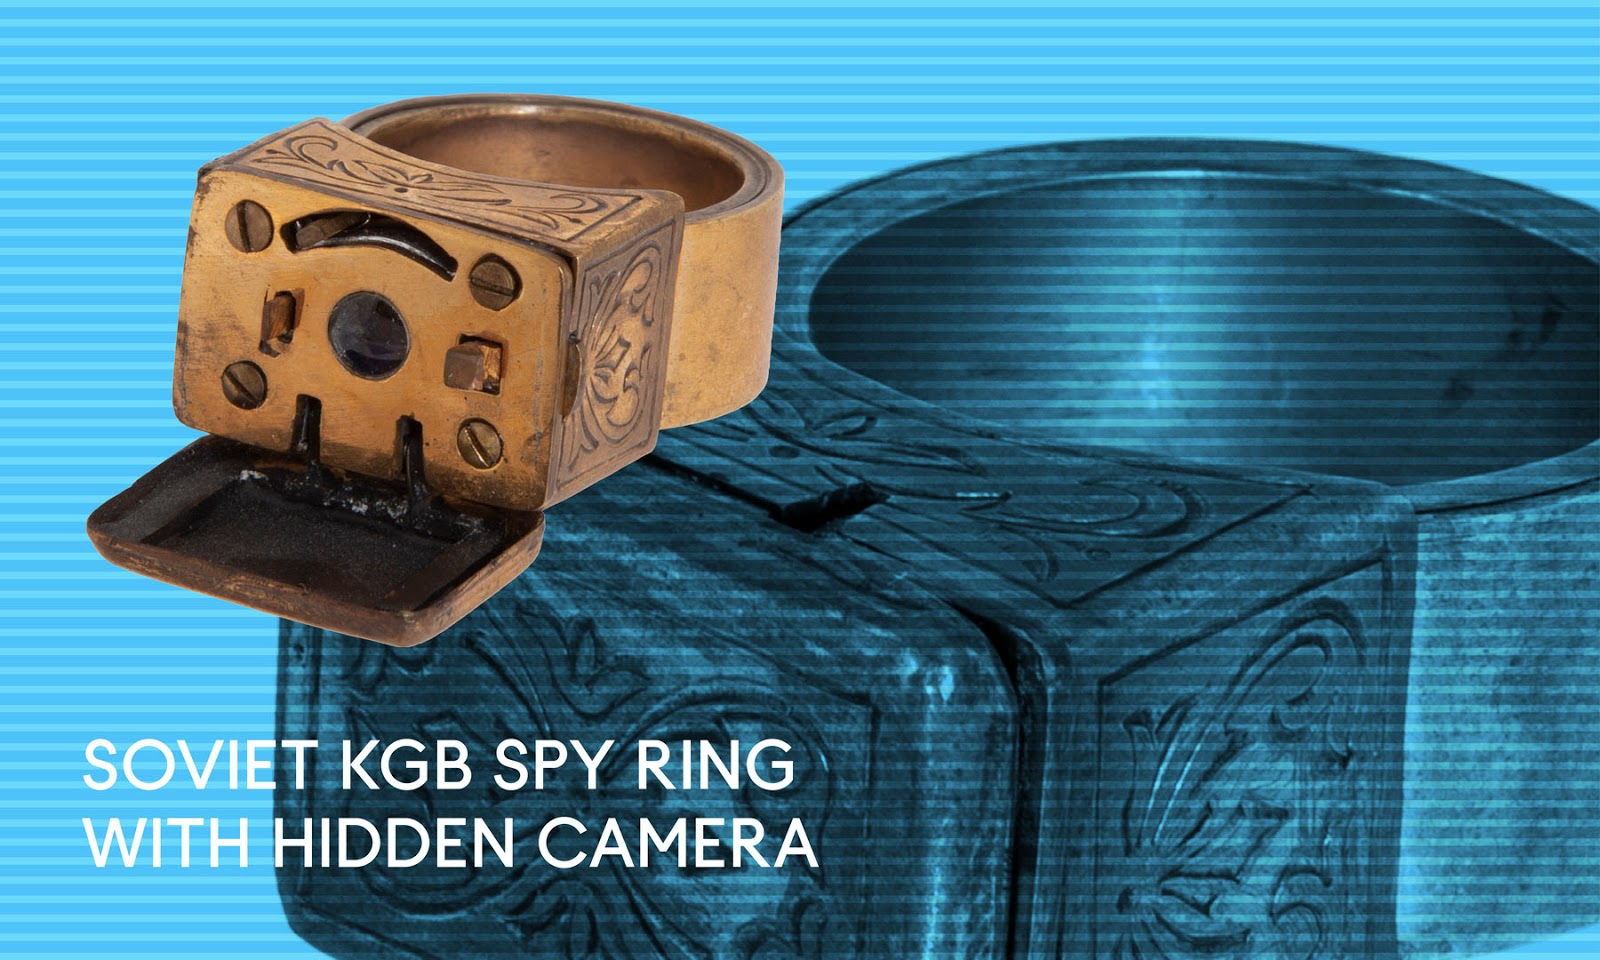 KGB Spy ring with camera